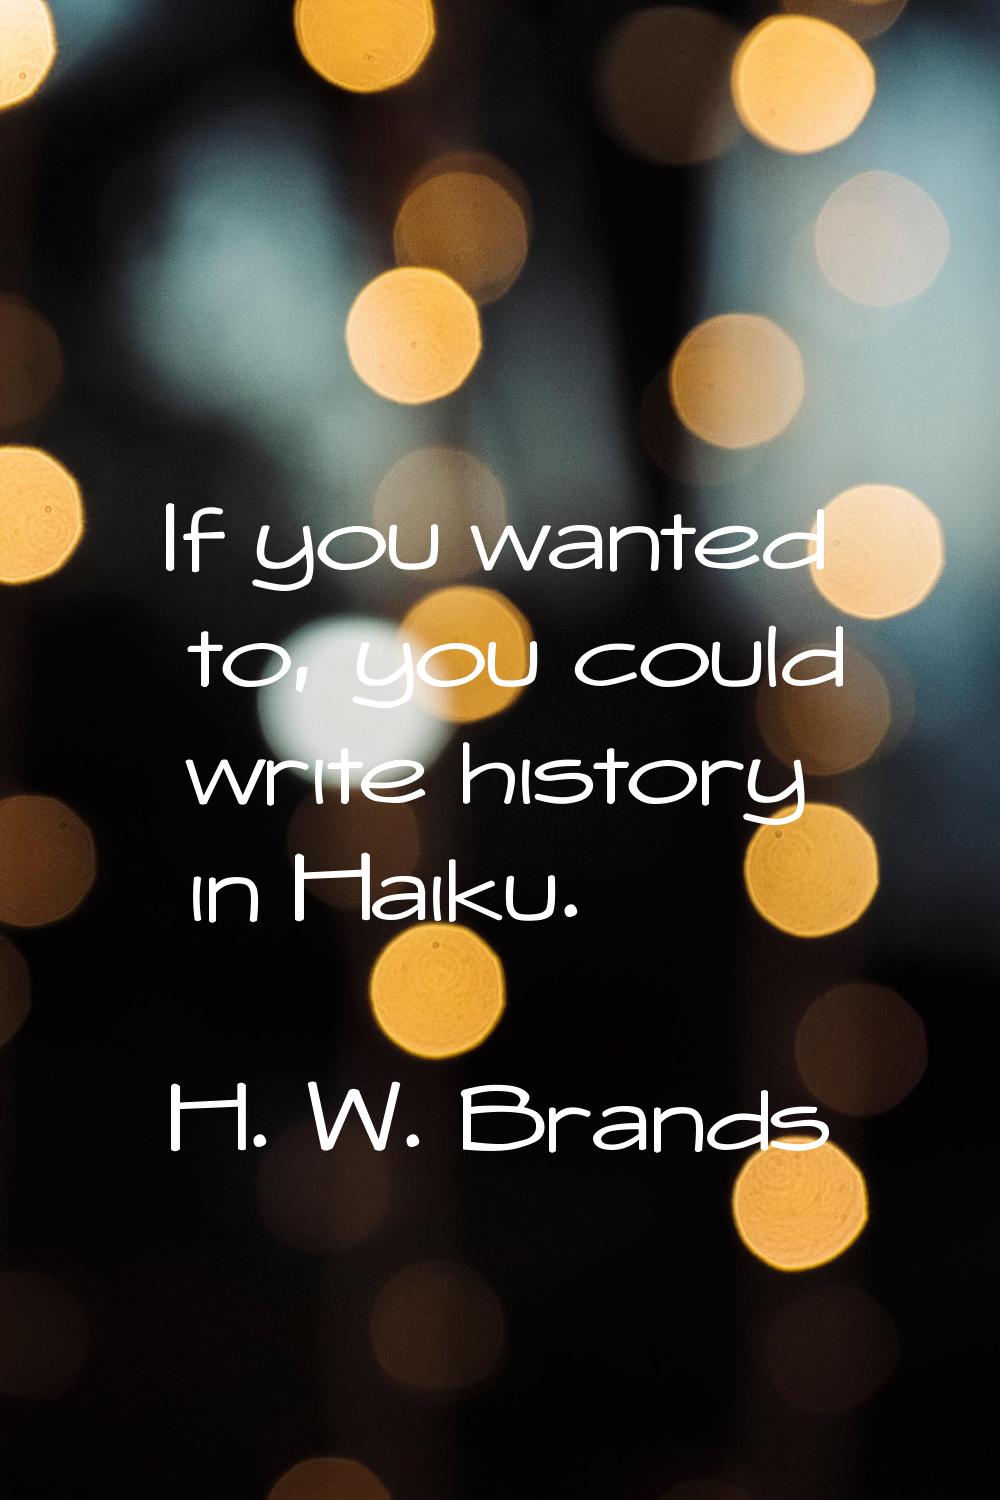 If you wanted to, you could write history in Haiku.